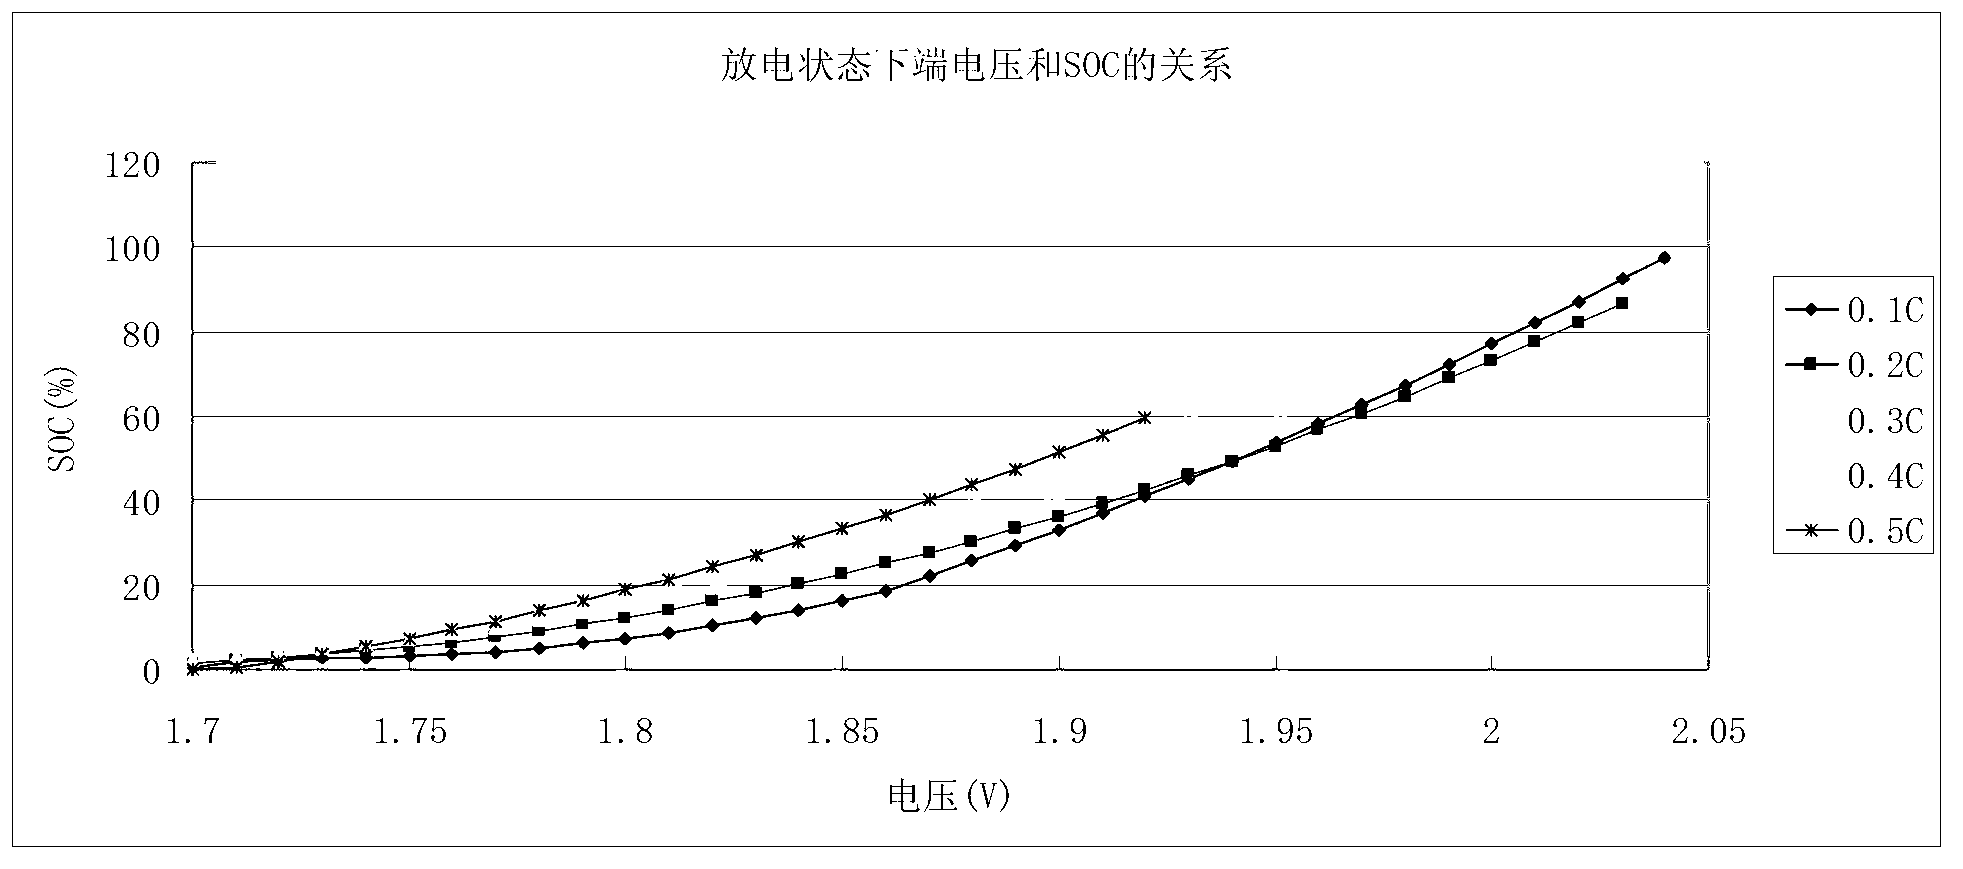 Estimation method of initial state of charge (SOC0) of lead-acid cell